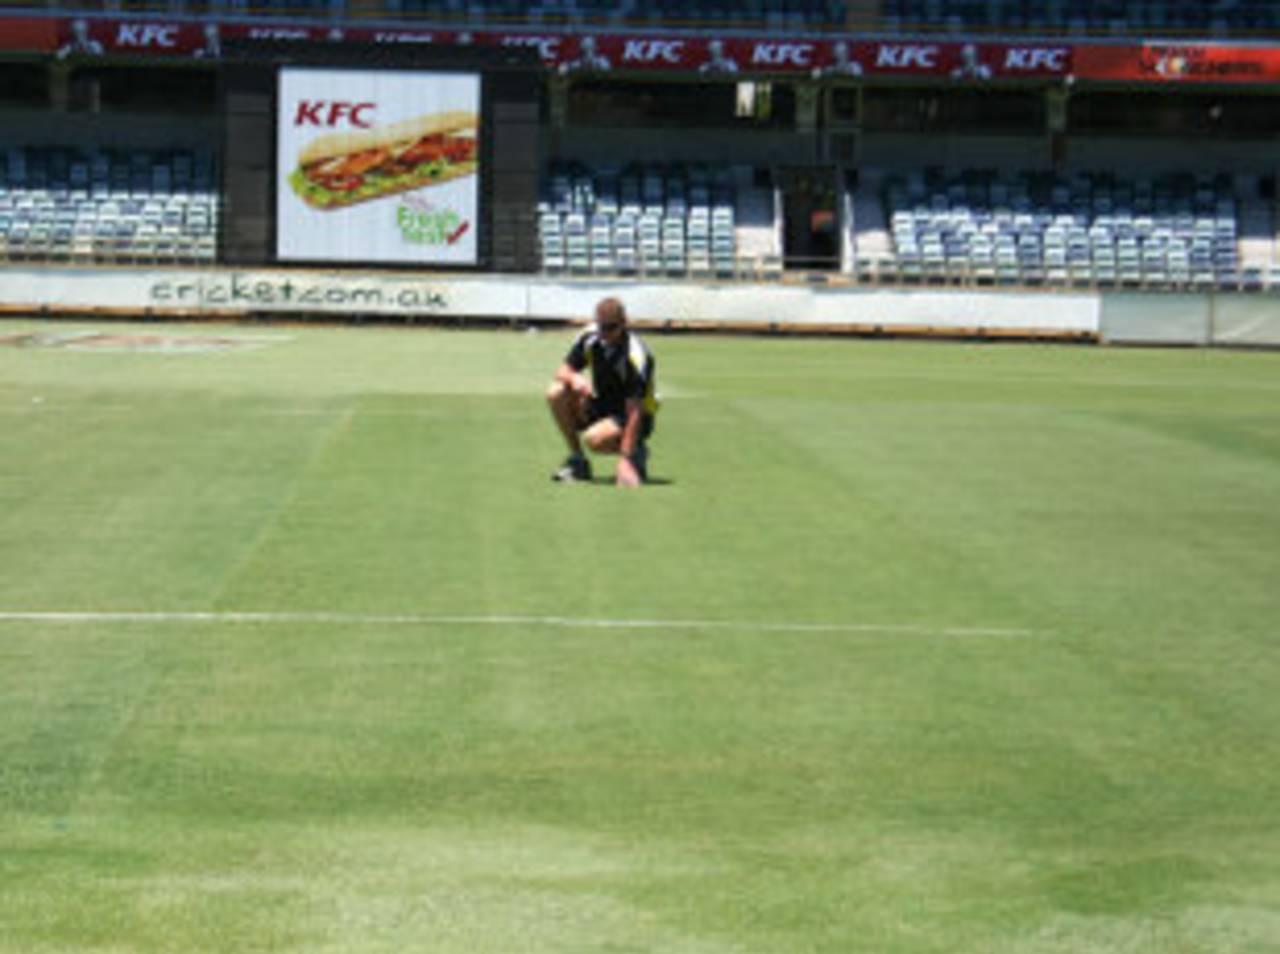 Cameron Sutherland feels this pitch will show characteristics of the WACA of the old&nbsp;&nbsp;&bull;&nbsp;&nbsp;ESPNcricinfo Ltd